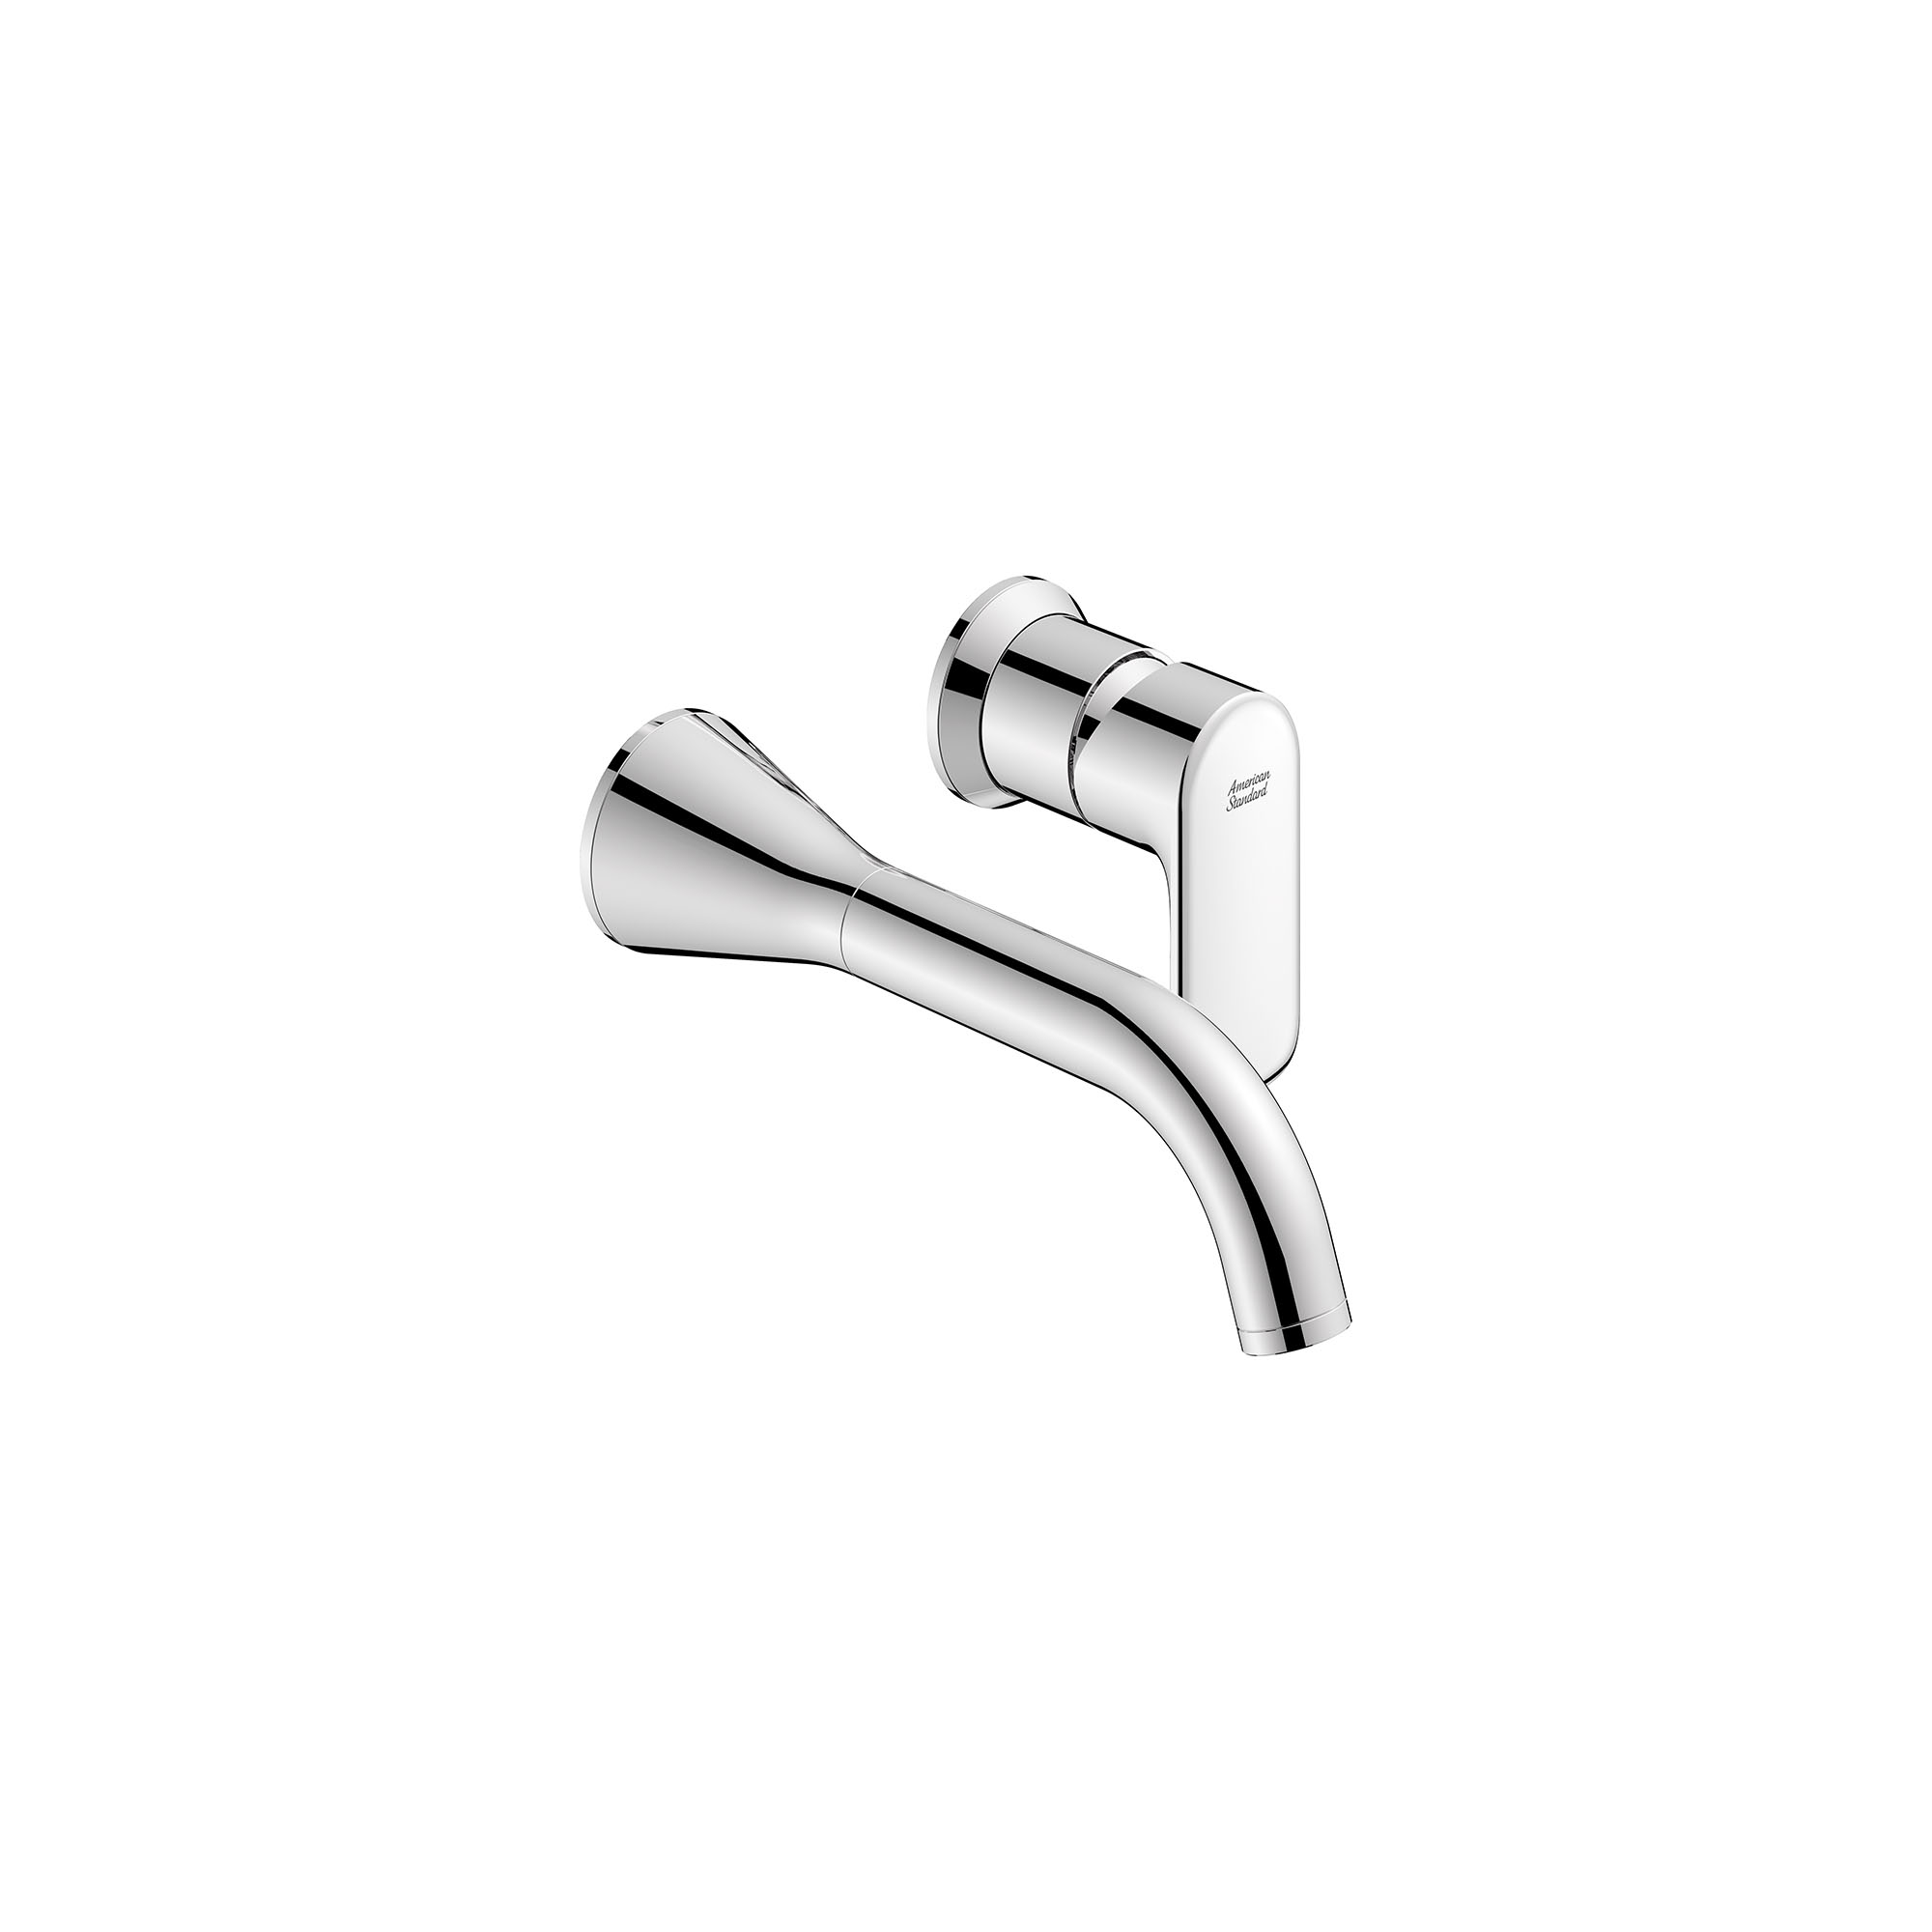 Aspirations™ Single Handle Wall-Mount Faucet 1.2 gpm/4.5 L/min With Lever Handle